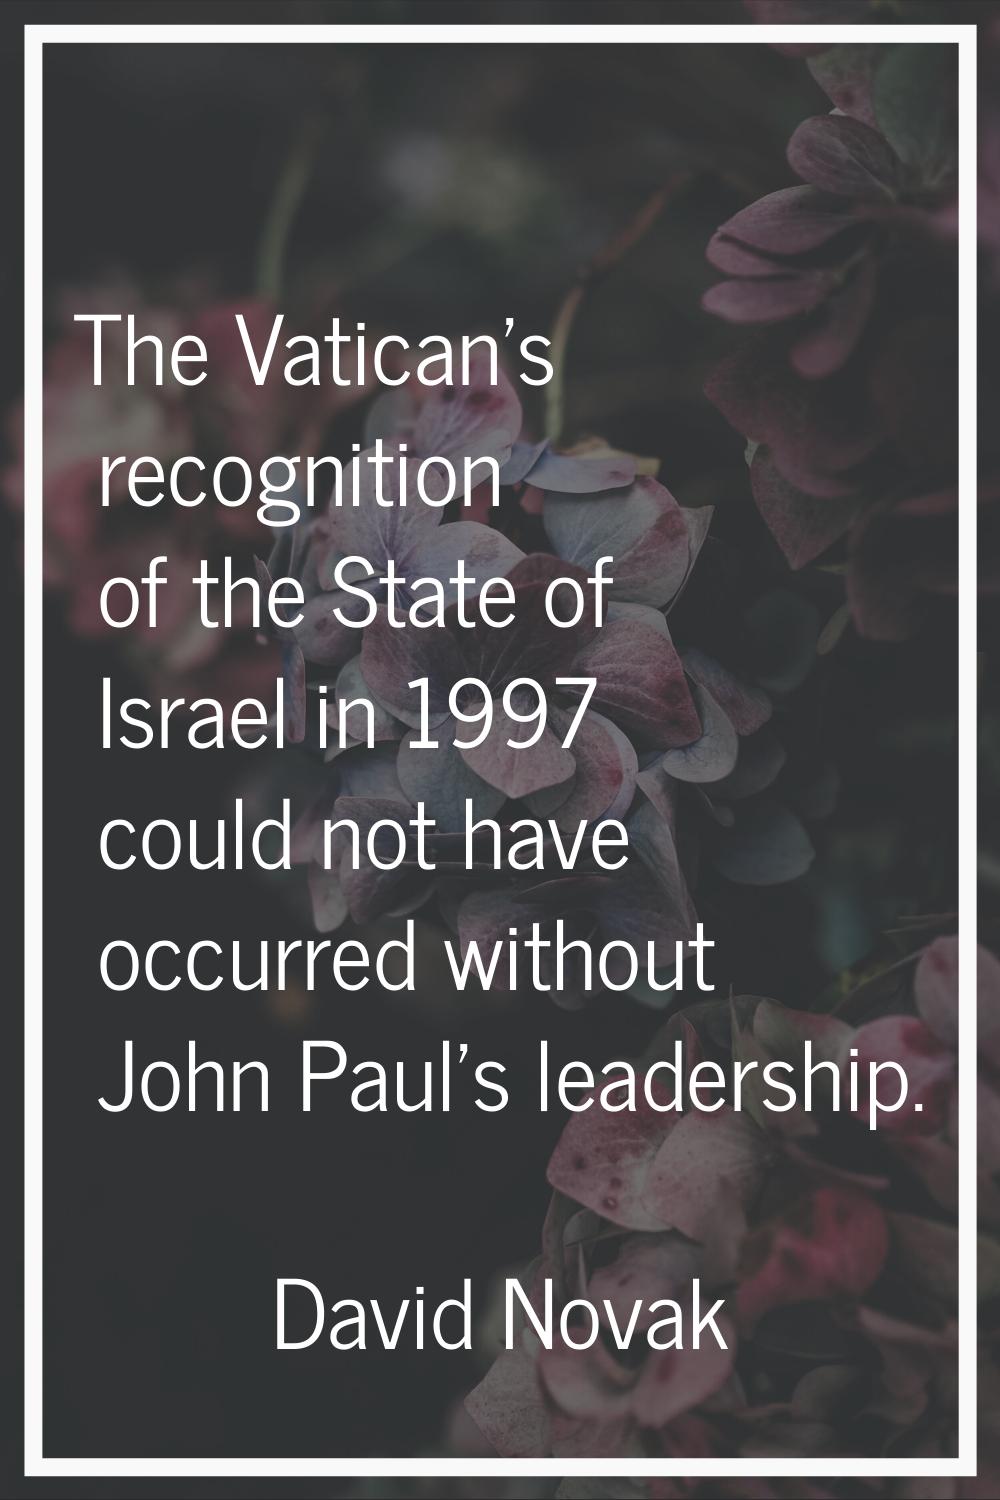 The Vatican's recognition of the State of Israel in 1997 could not have occurred without John Paul'